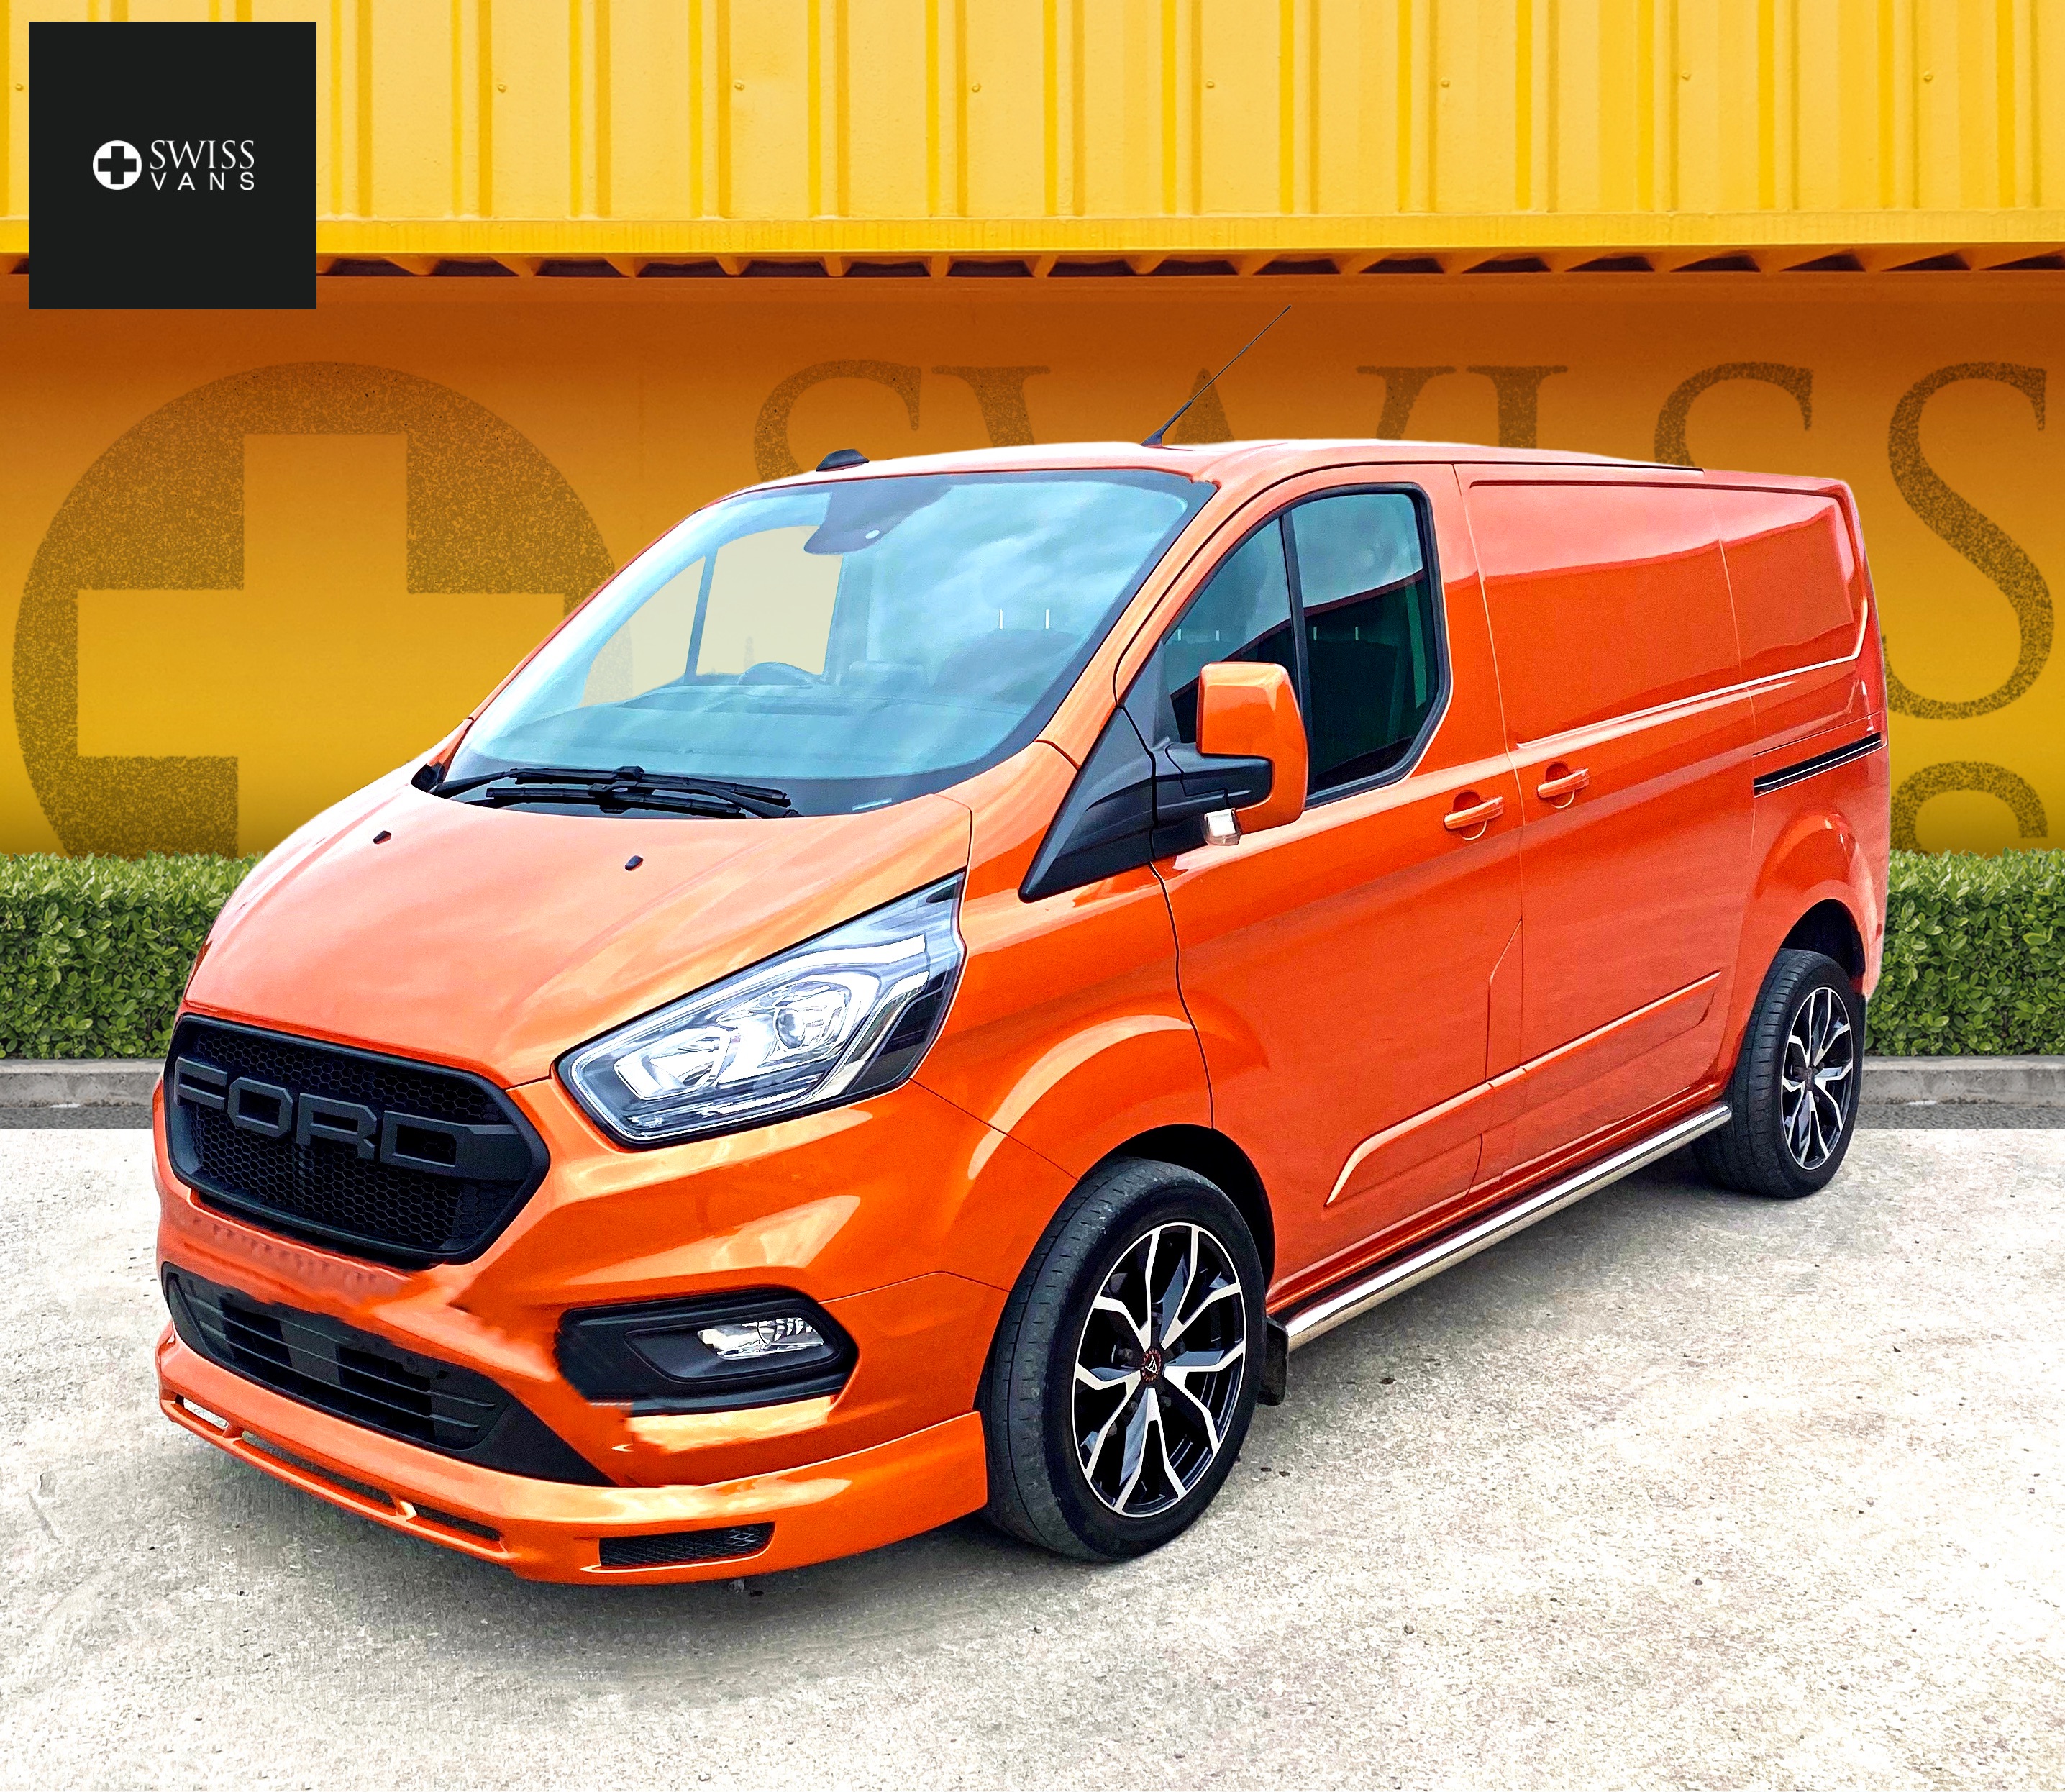 Presentador césped Hula hoop Swiss Vans on Twitter: "Orange Ford Transit Custom Automatic In Stock. Buy  this van by ringing the telephone number in this link  https://t.co/4pbnite2gp #instock #ford #orange #transit #custom #stock  #phone #number #link #